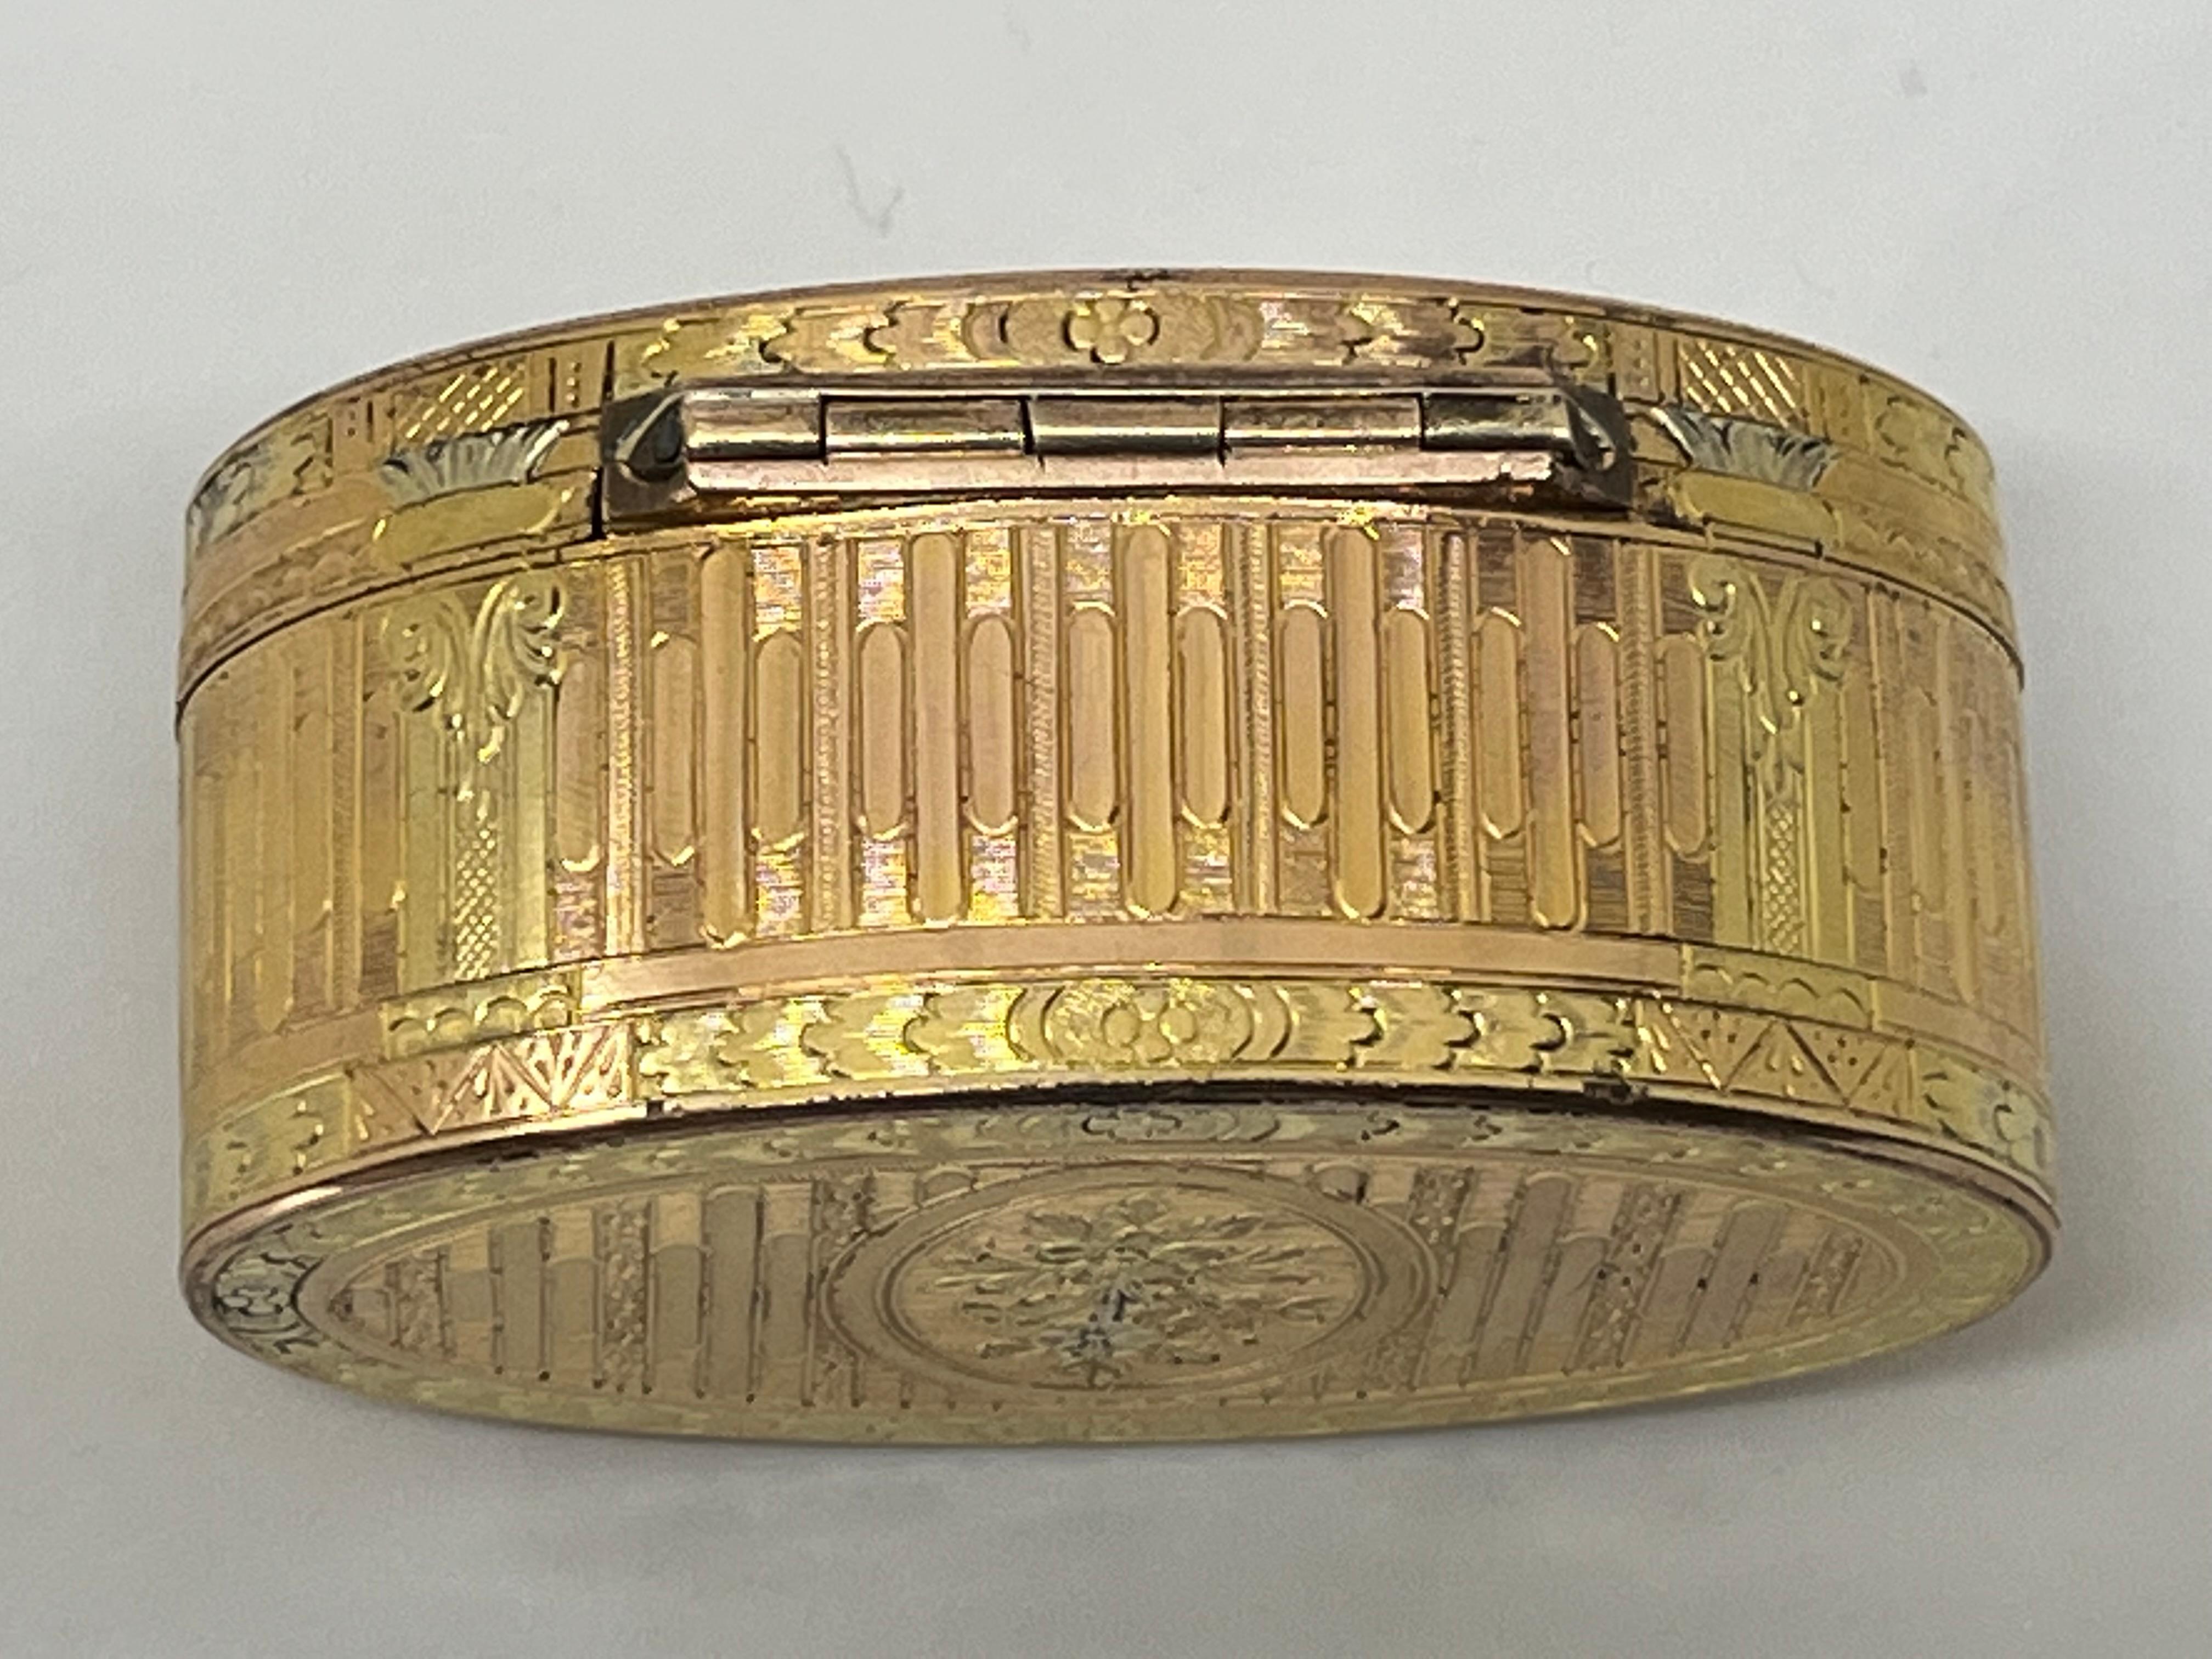 French Eighteenth-Century Silver-Gilt Snuff Box, of Outstanding Quality 2